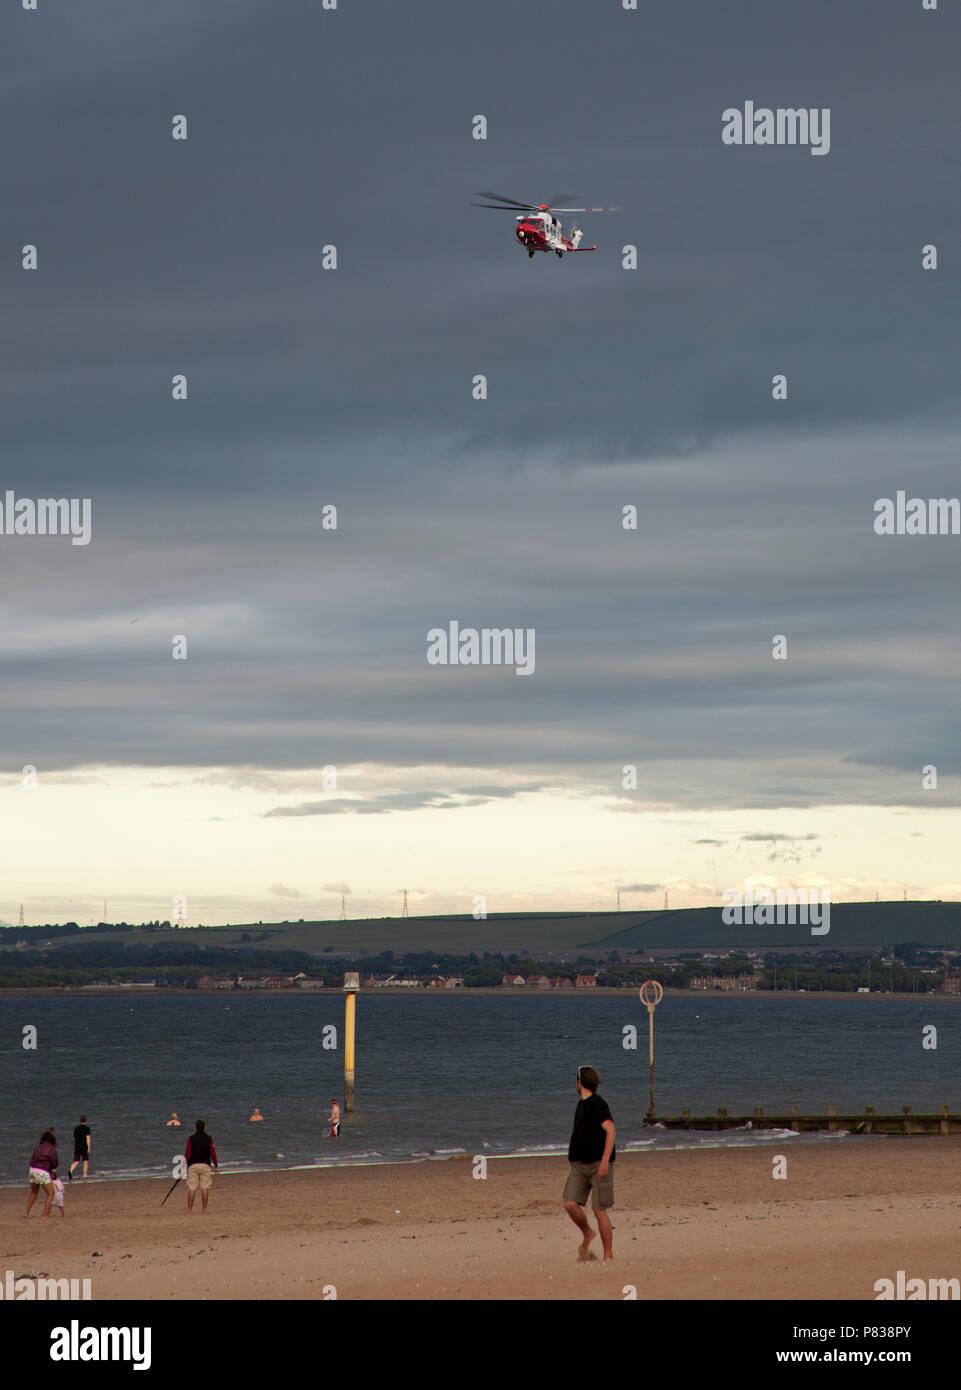 Edinburgh, UK. 08 July 2018. Portobello Beach, Edinburgh, Scotland, UK, between 7pm and 9pm this evening coastguard with four or more vehicles plus one helicopter and a reinforced boat conducting a search of the shoreline of the busy beach, unknown incident Stock Photo